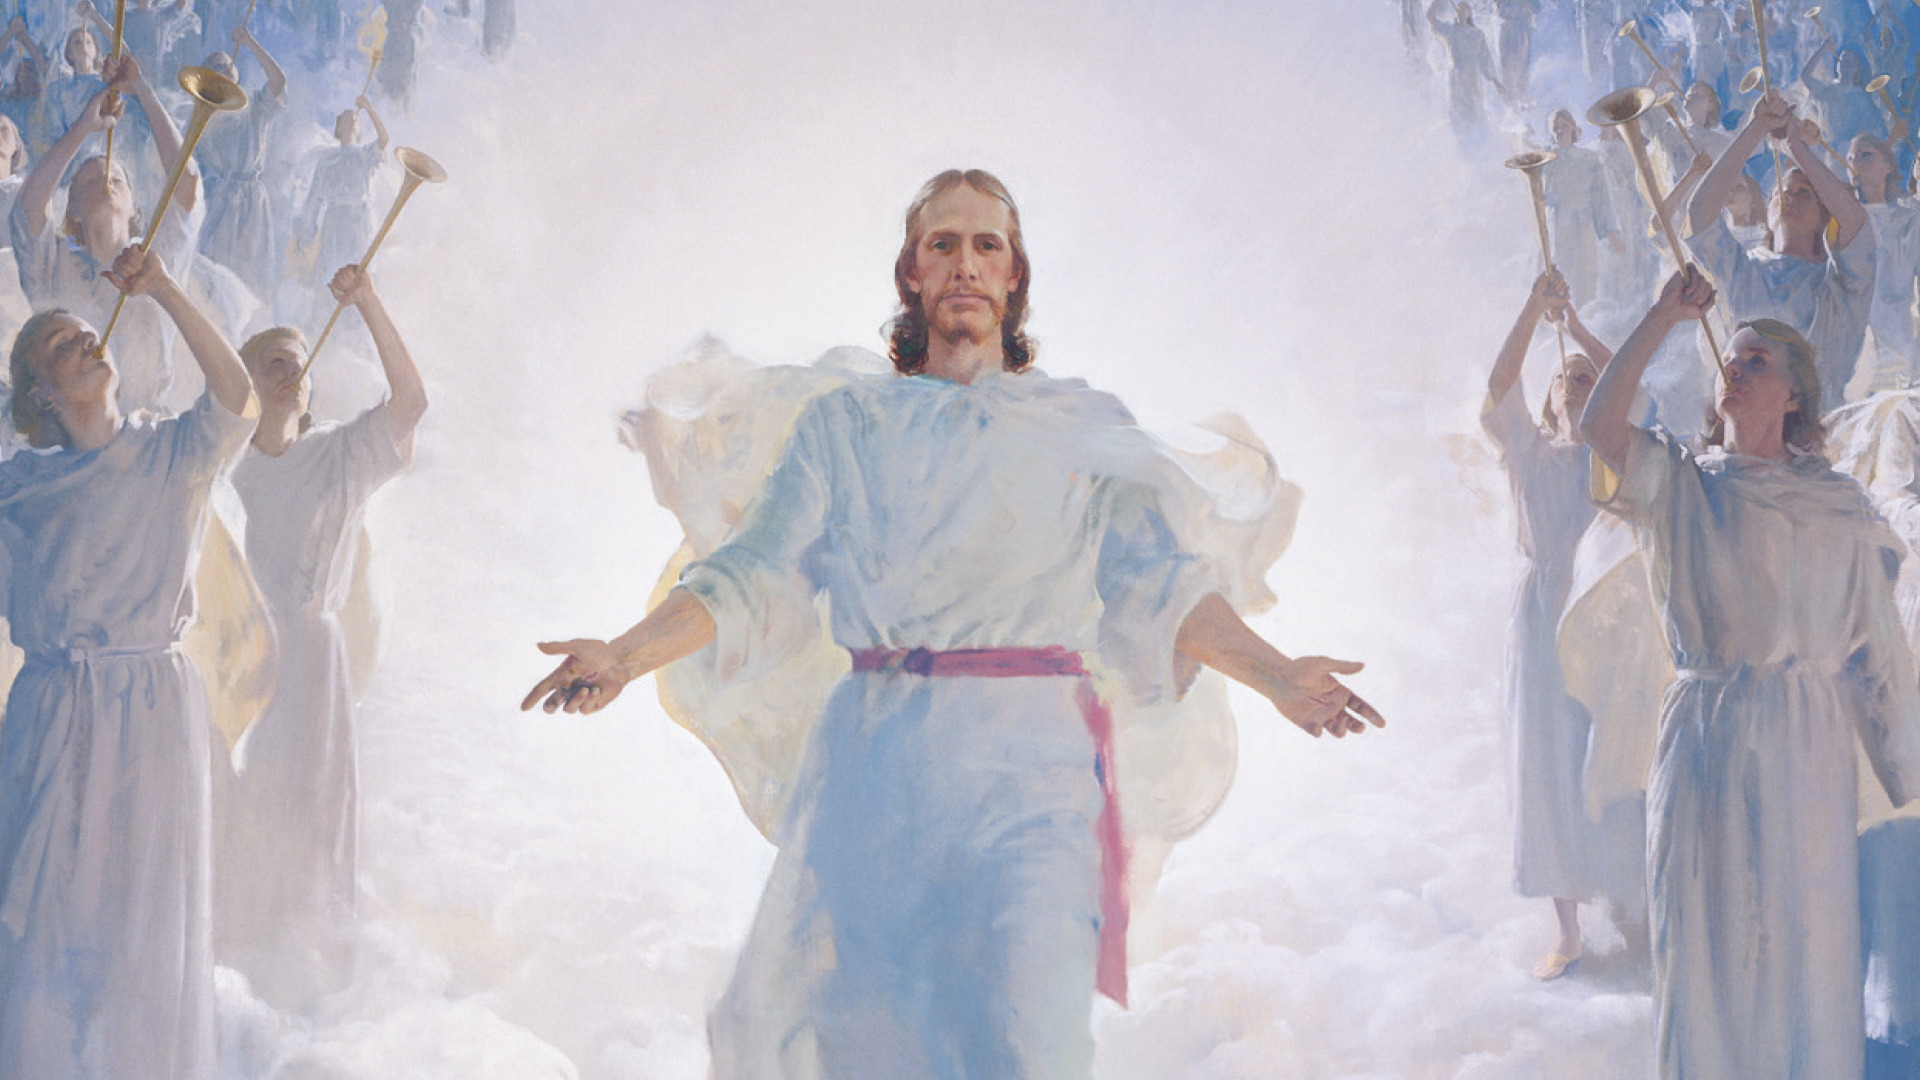 Slide for Chad H. Webb's S&I Broadcast material. The resurrected Jesus Christ (wearing white robes with a magenta sash) standing above a large gathering of clouds. Christ has His arms partially extended. The wounds in the hands of Christ are visible. Numerous angels (each blowing a trumpet) are gathered on both sides of Christ. A desert landscape is visible below the clouds. The painting depicts the Second coming of Christ. (Acts 1:11)